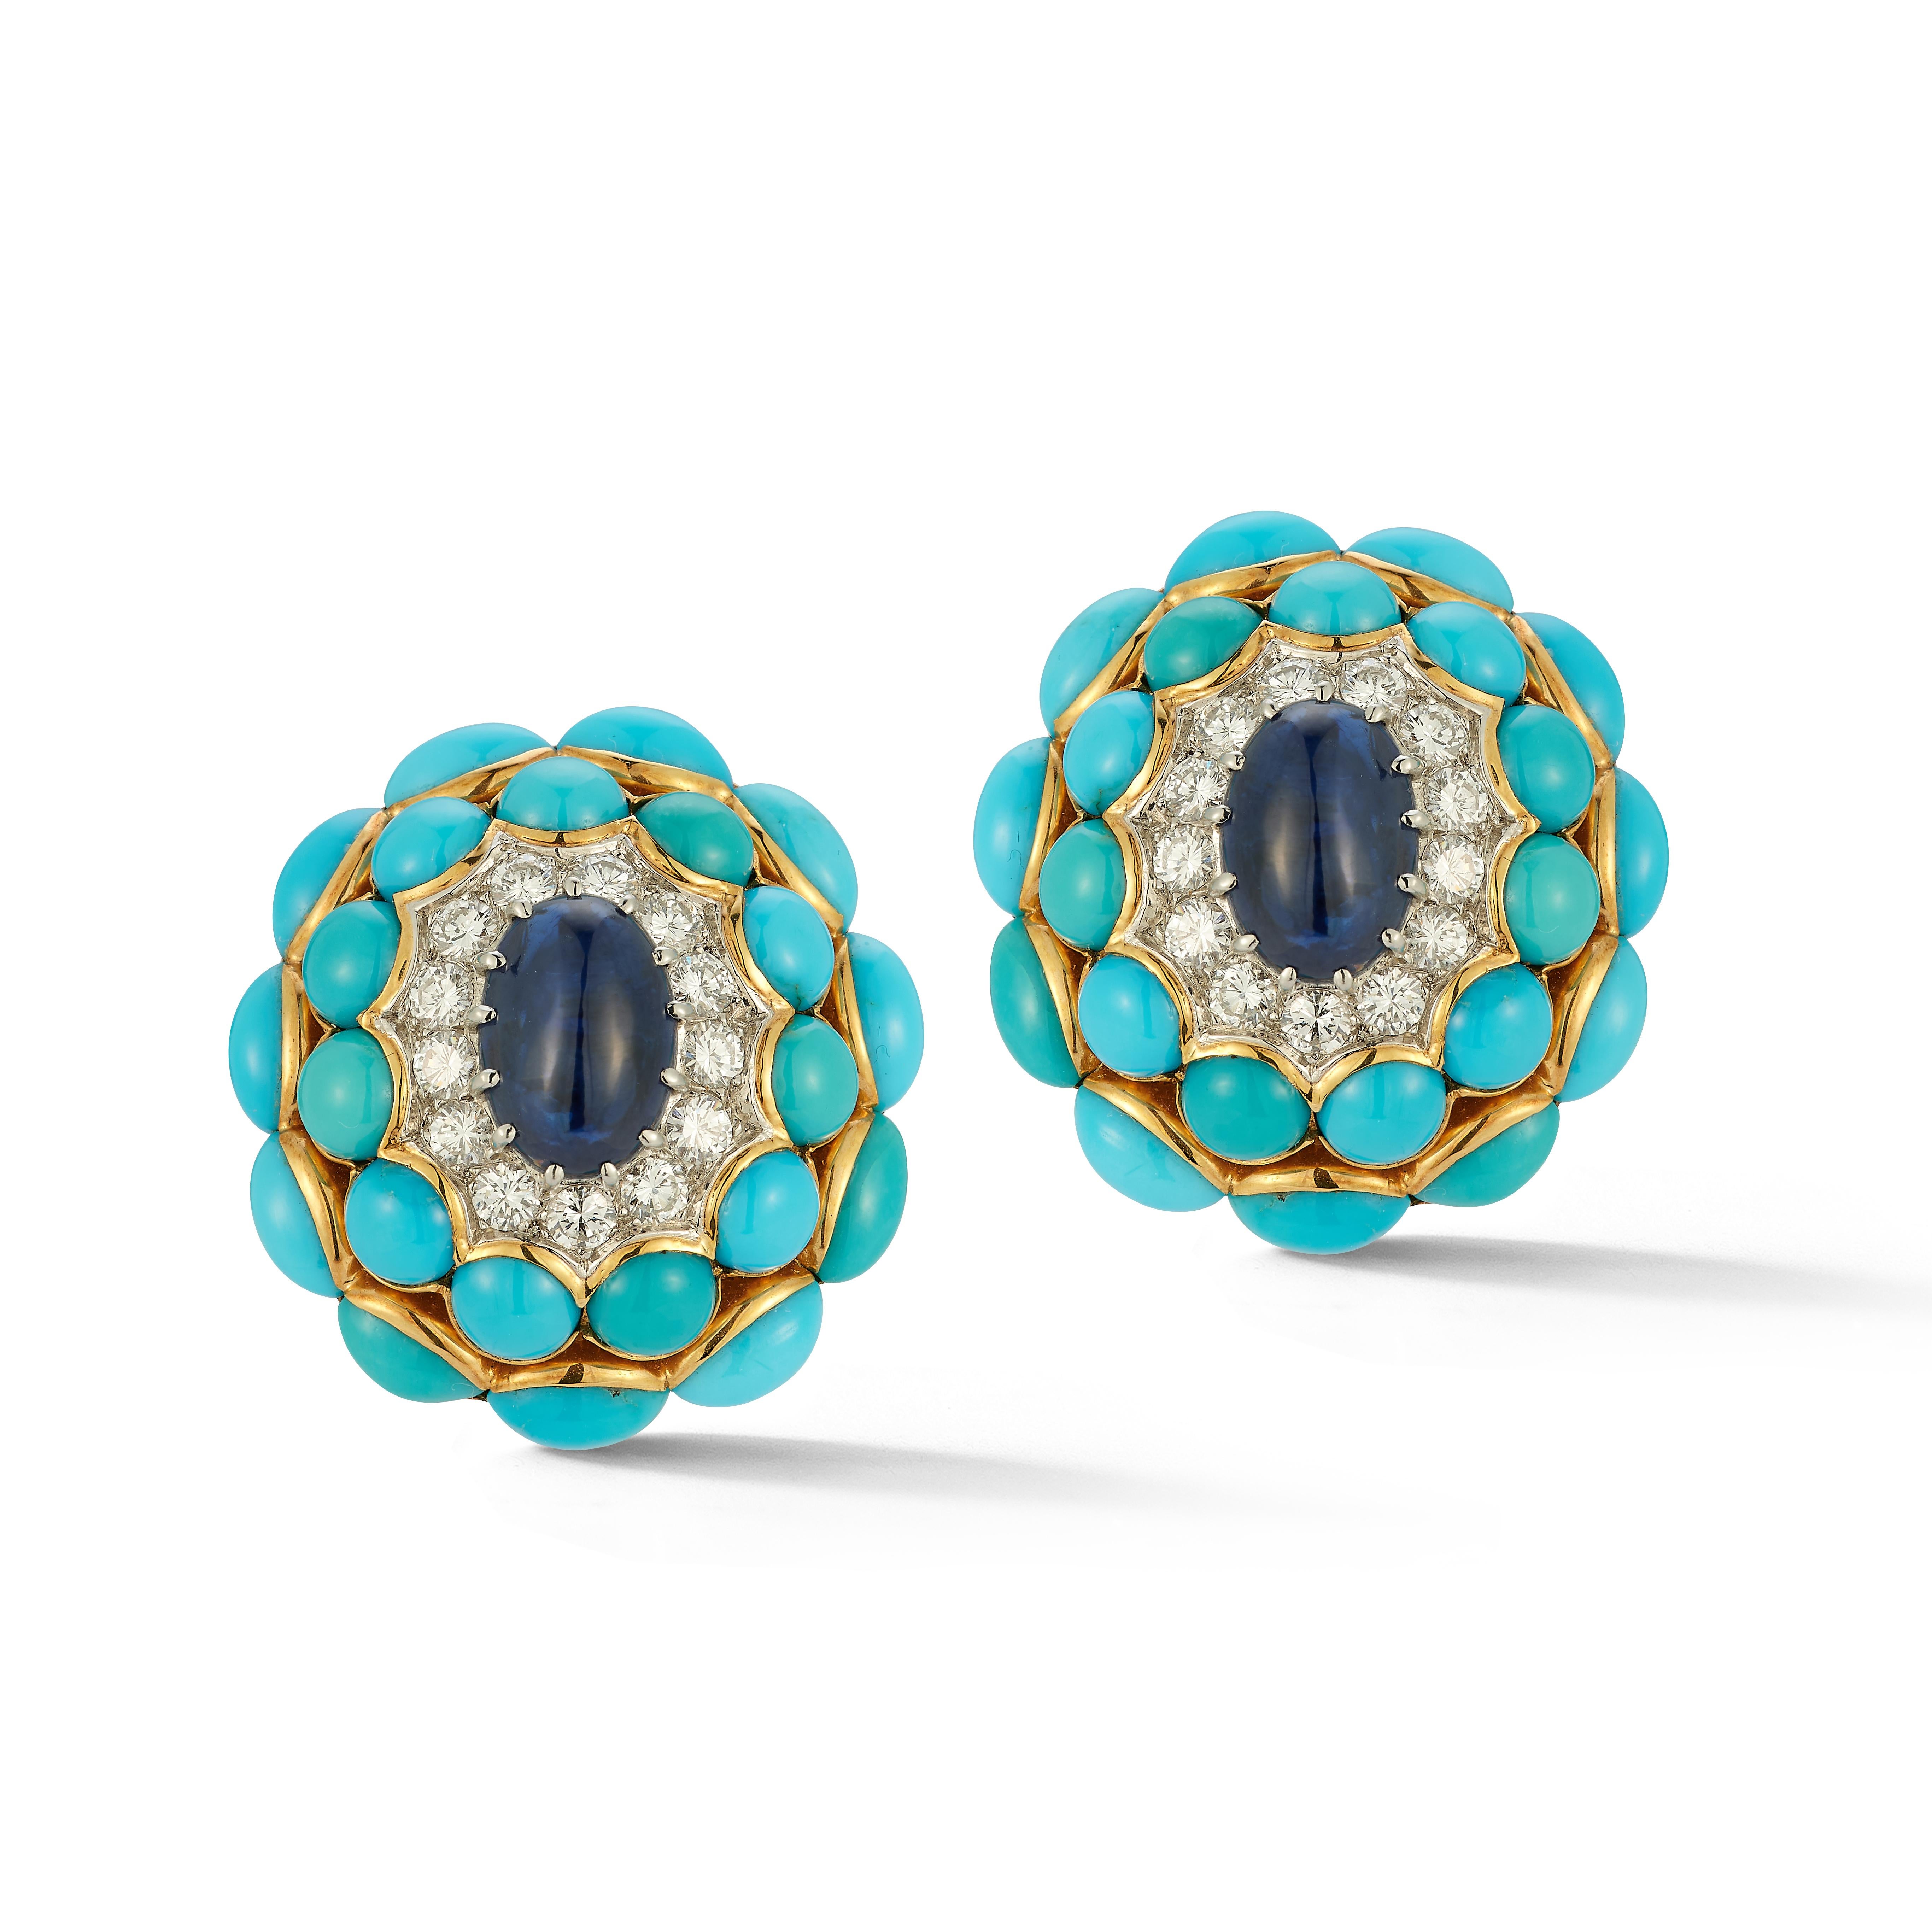 Large Size Van Cleef & Arpels Turquoise & Sapphire Earrings

A pair of 18 karat yellow gold earrings each set with a central cabochon sapphire framed by 13 round cut diamonds and 2 rows of cabochon turquoises 

Signed VCA and numbered

Circa